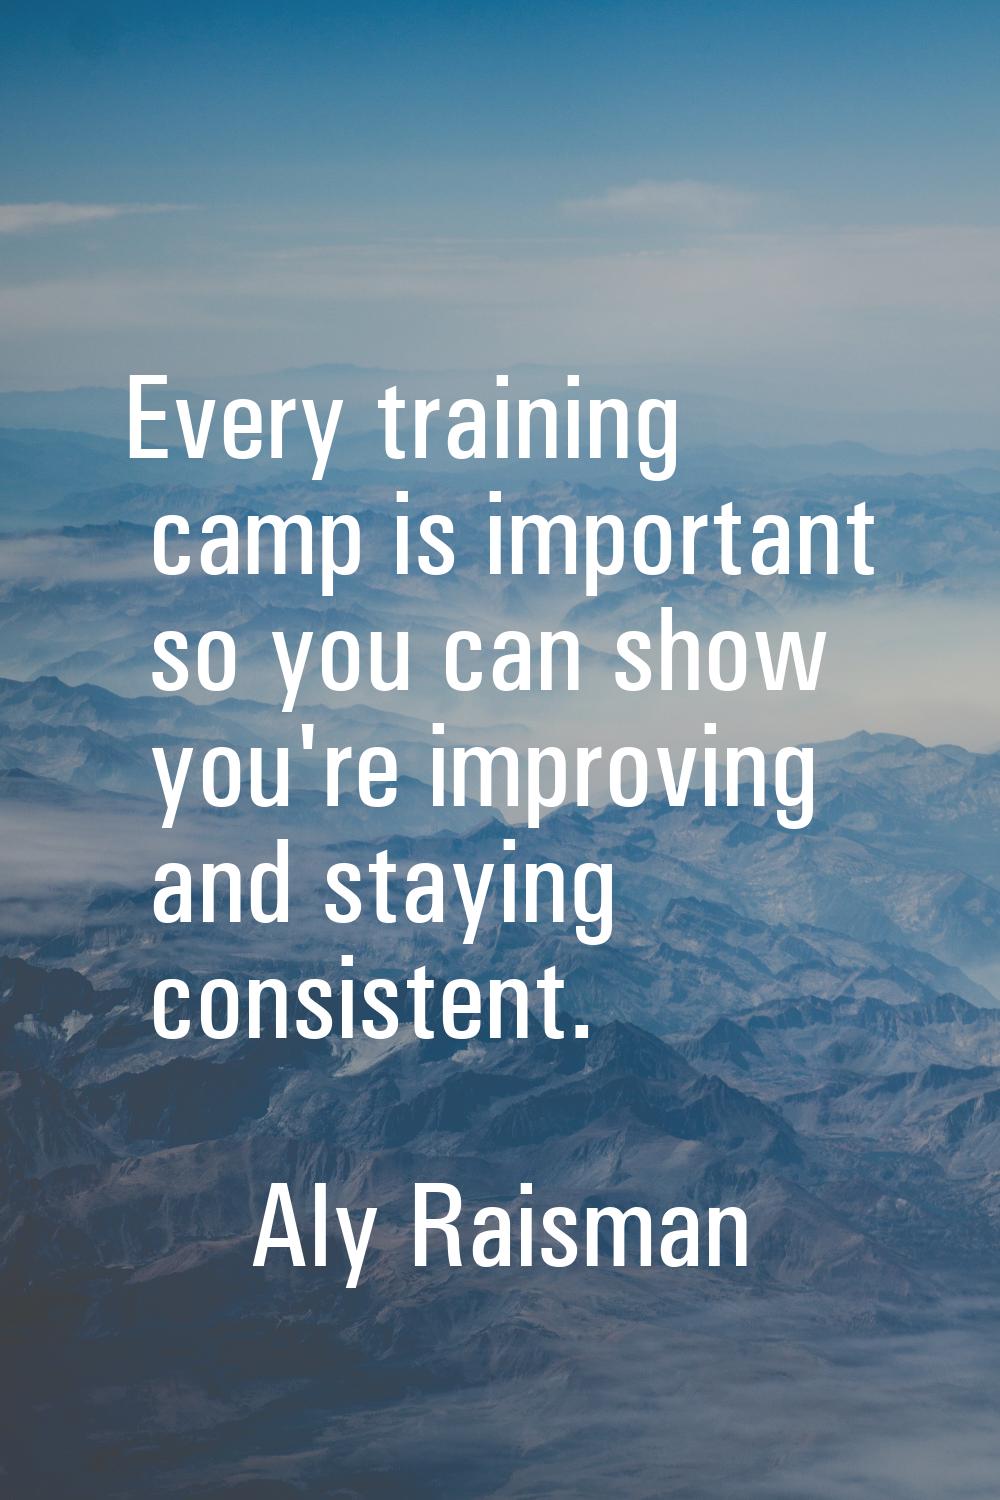 Every training camp is important so you can show you're improving and staying consistent.